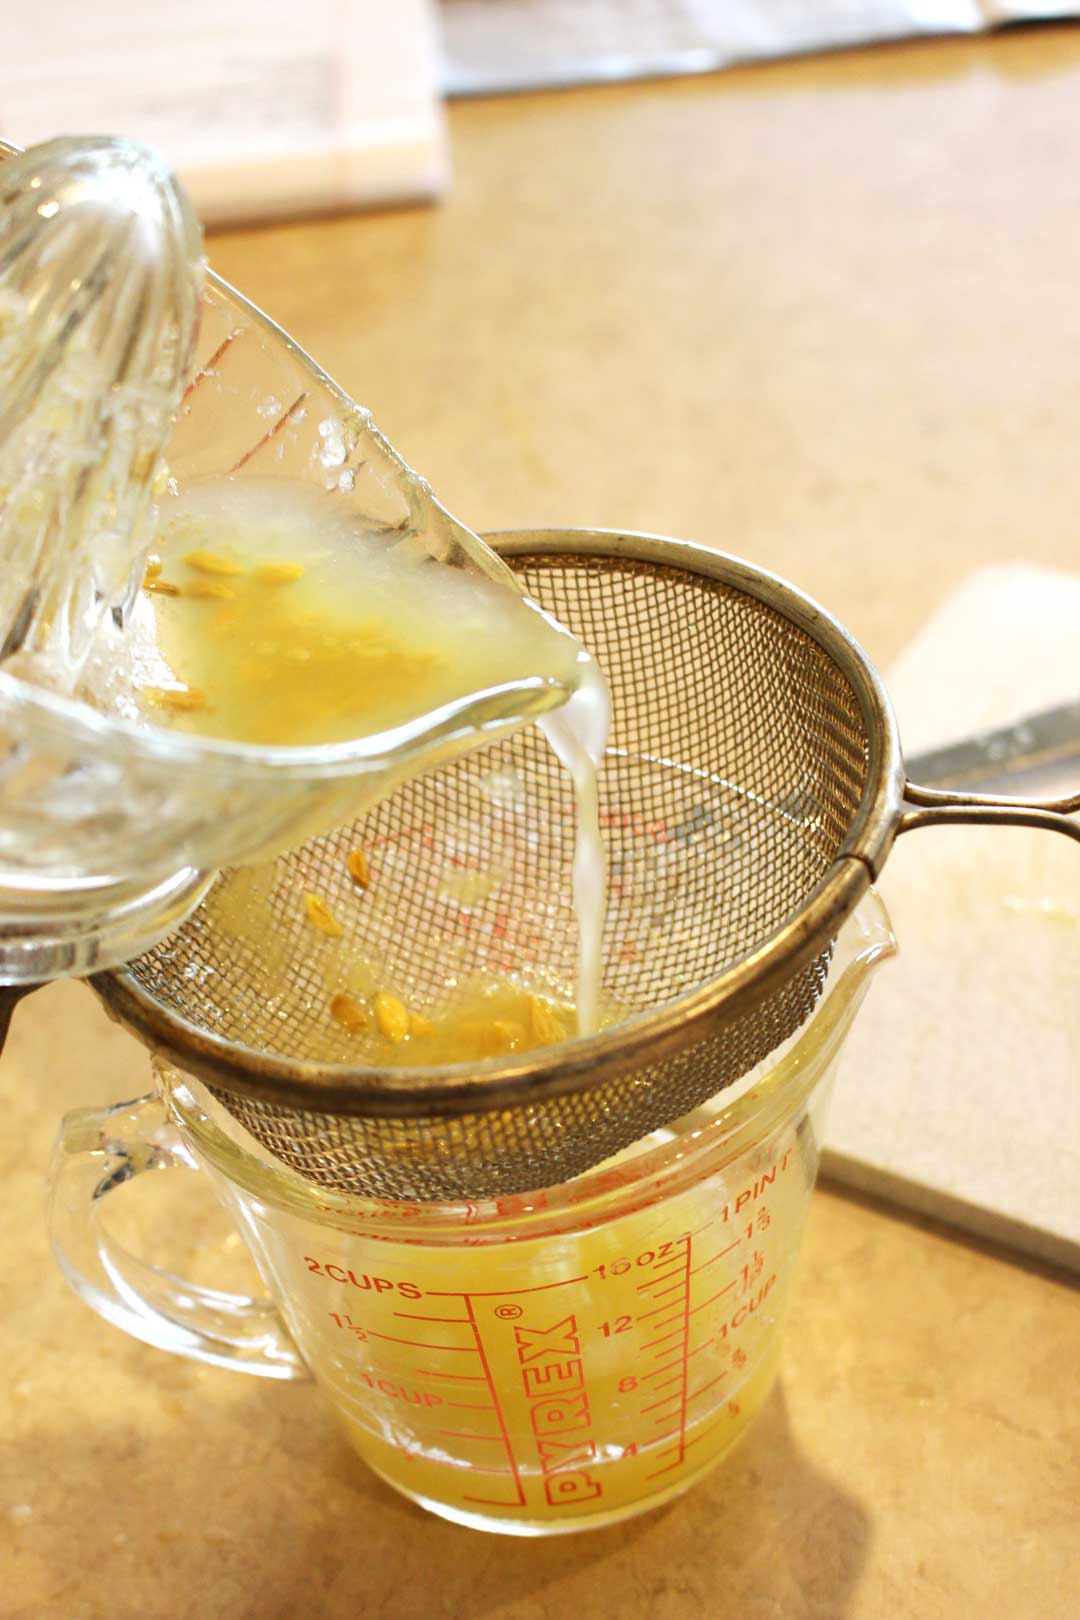 Freshly squeezed lemon juice being poured through a strainer into a glass measuring cup.